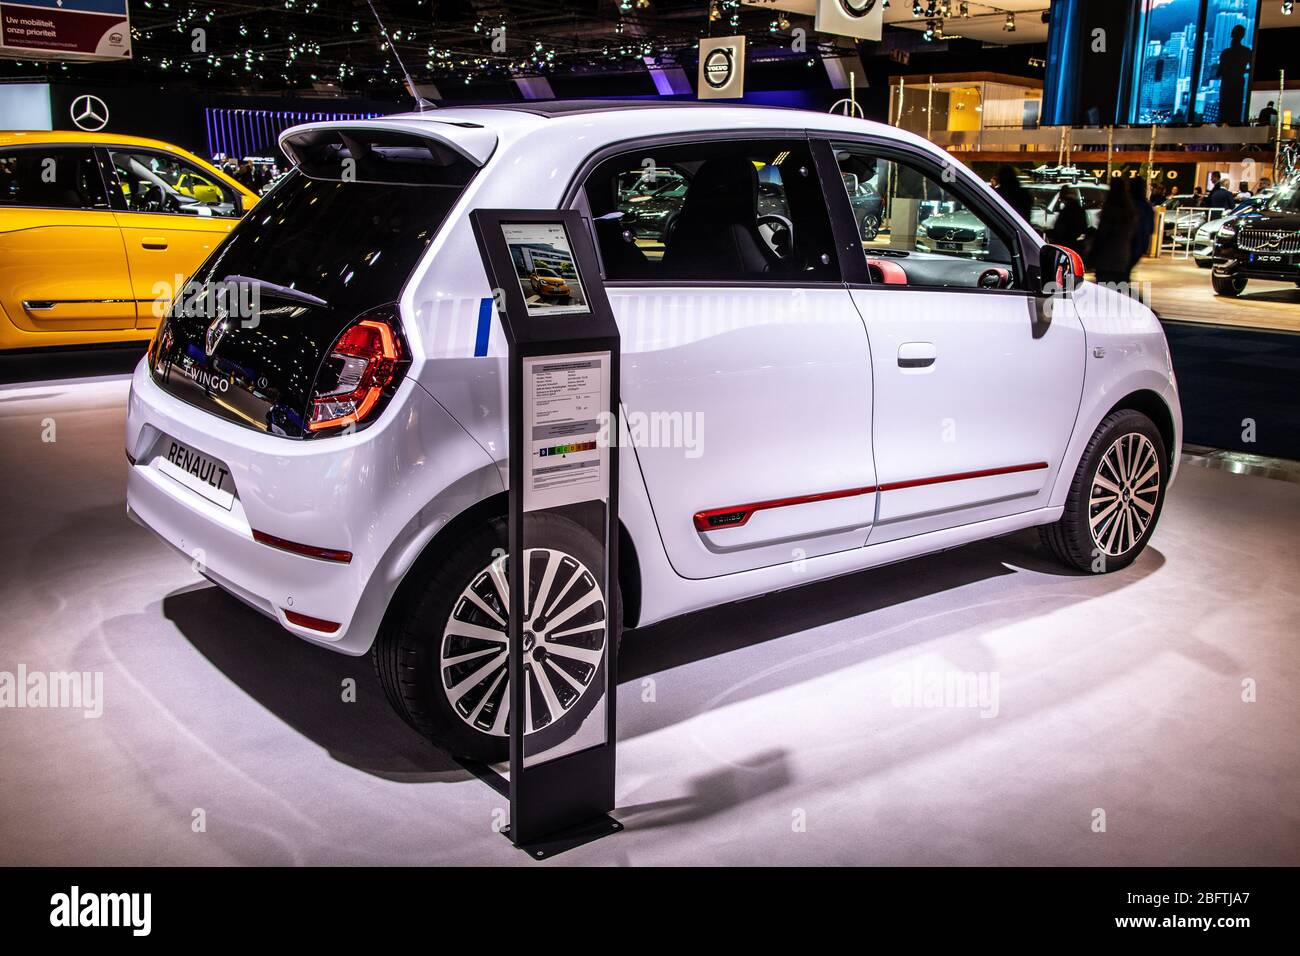 Brussels, Belgium, Jan 2020: Renault Twingo, Brussels Motor Show, third generation, MK3, rear-engine, rear-wheel-drive city car produced by Renault Stock Photo